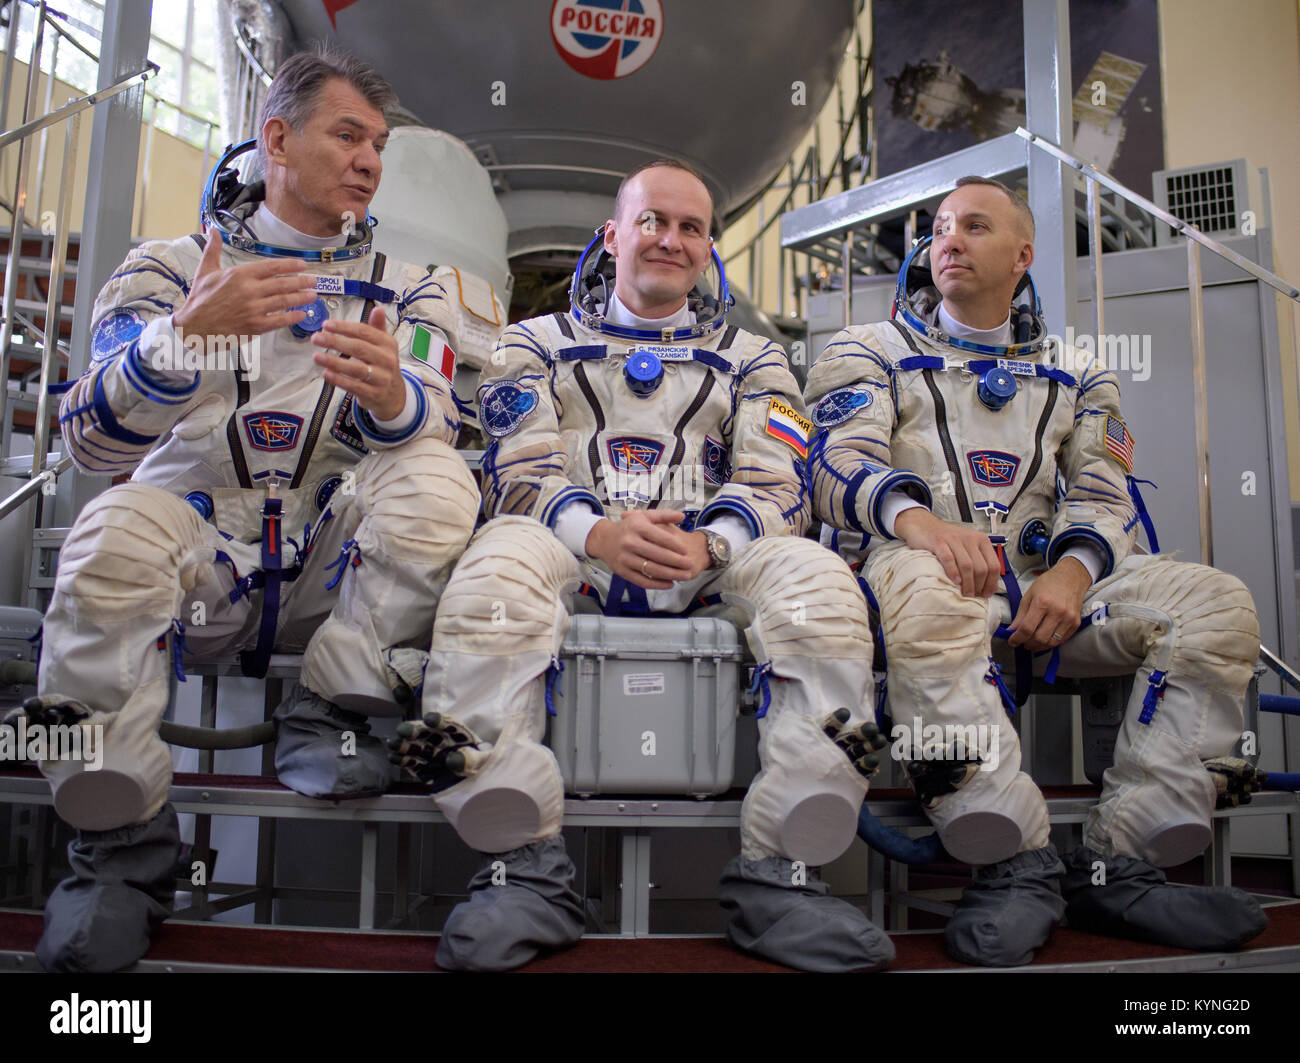 Expedition 52 flight engineers Paolo Nespoli of ESA, left, Sergey Ryazanskiy of Roscosmos, and Randy Bresnik of NASA answer questions from the press outside the Soyuz simulator ahead of their final Soyuz qualification exam, Friday, July 7, 2017 at the Gagarin Cosmonaut Training Center (GCTC) in Star City, Russia. Photo Credit: (NASA/Bill Ingalls) Stock Photo